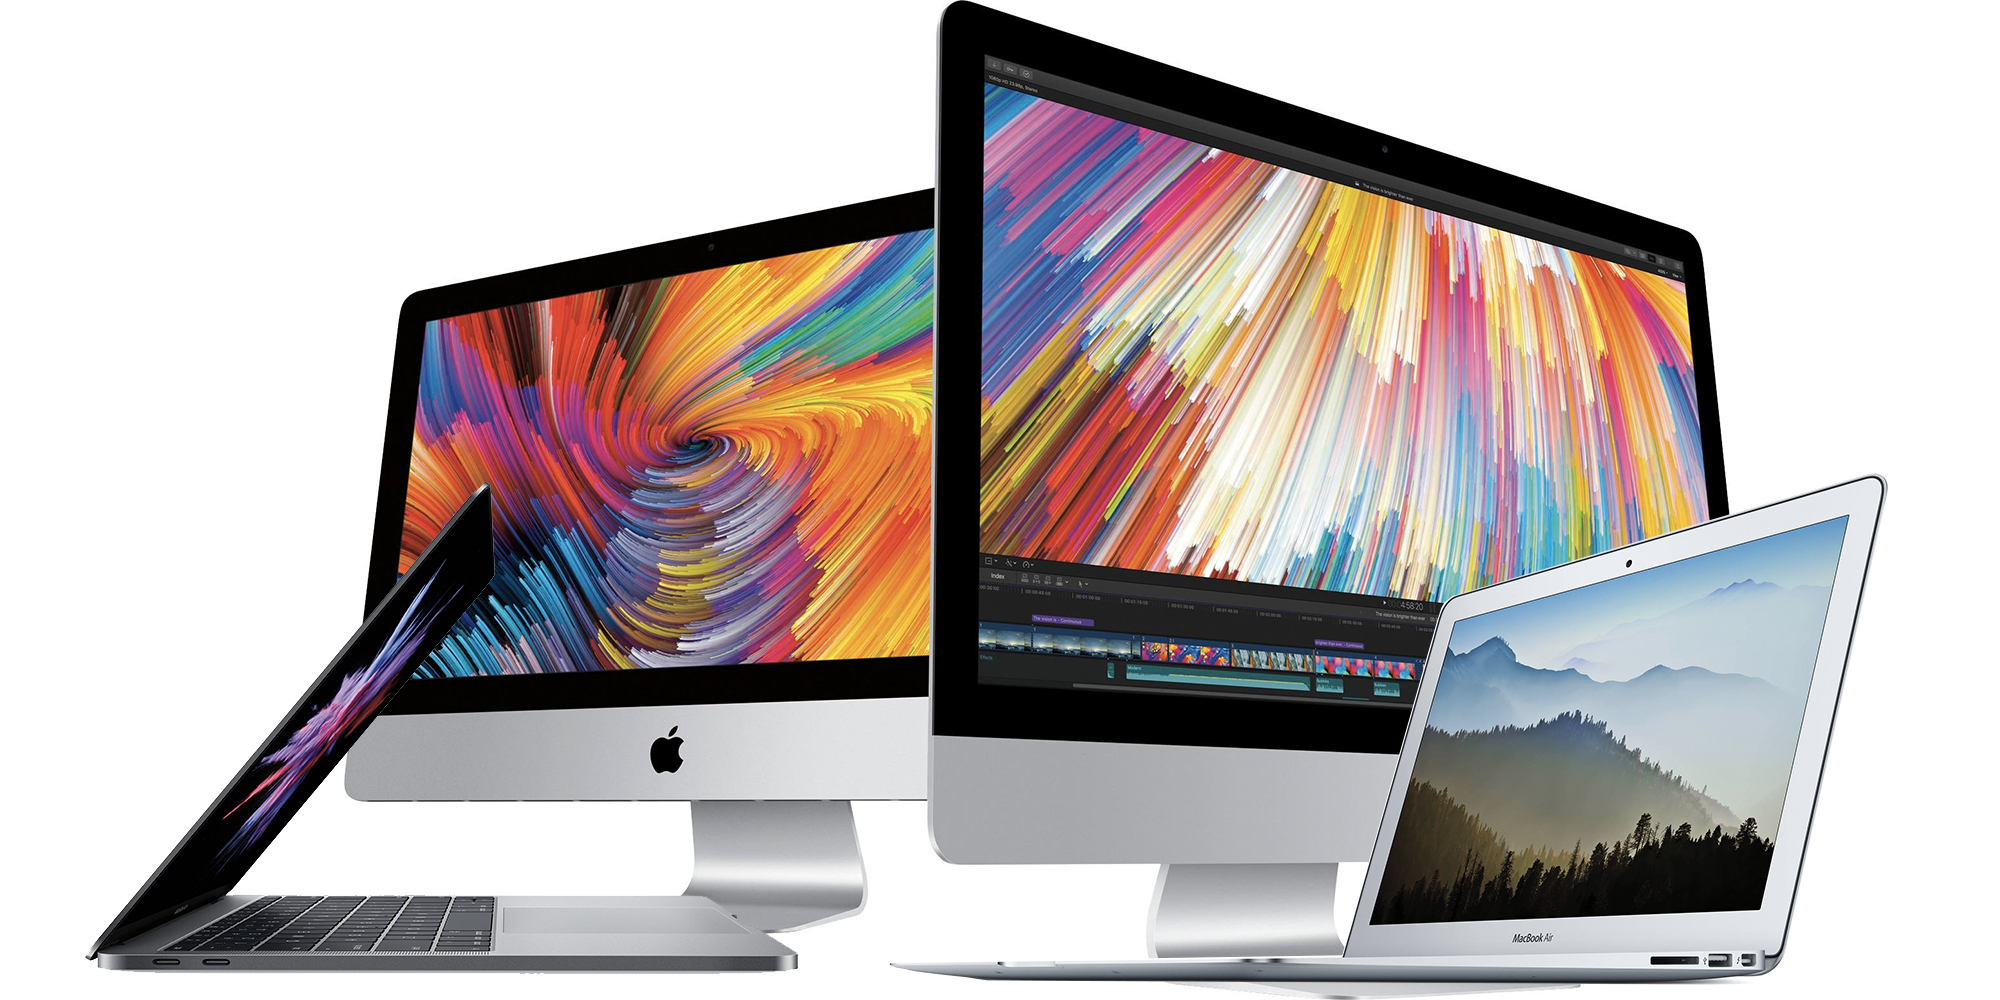 best-buy-has-250-off-macbooks-and-up-to-500-off-imacs-in-its-apple